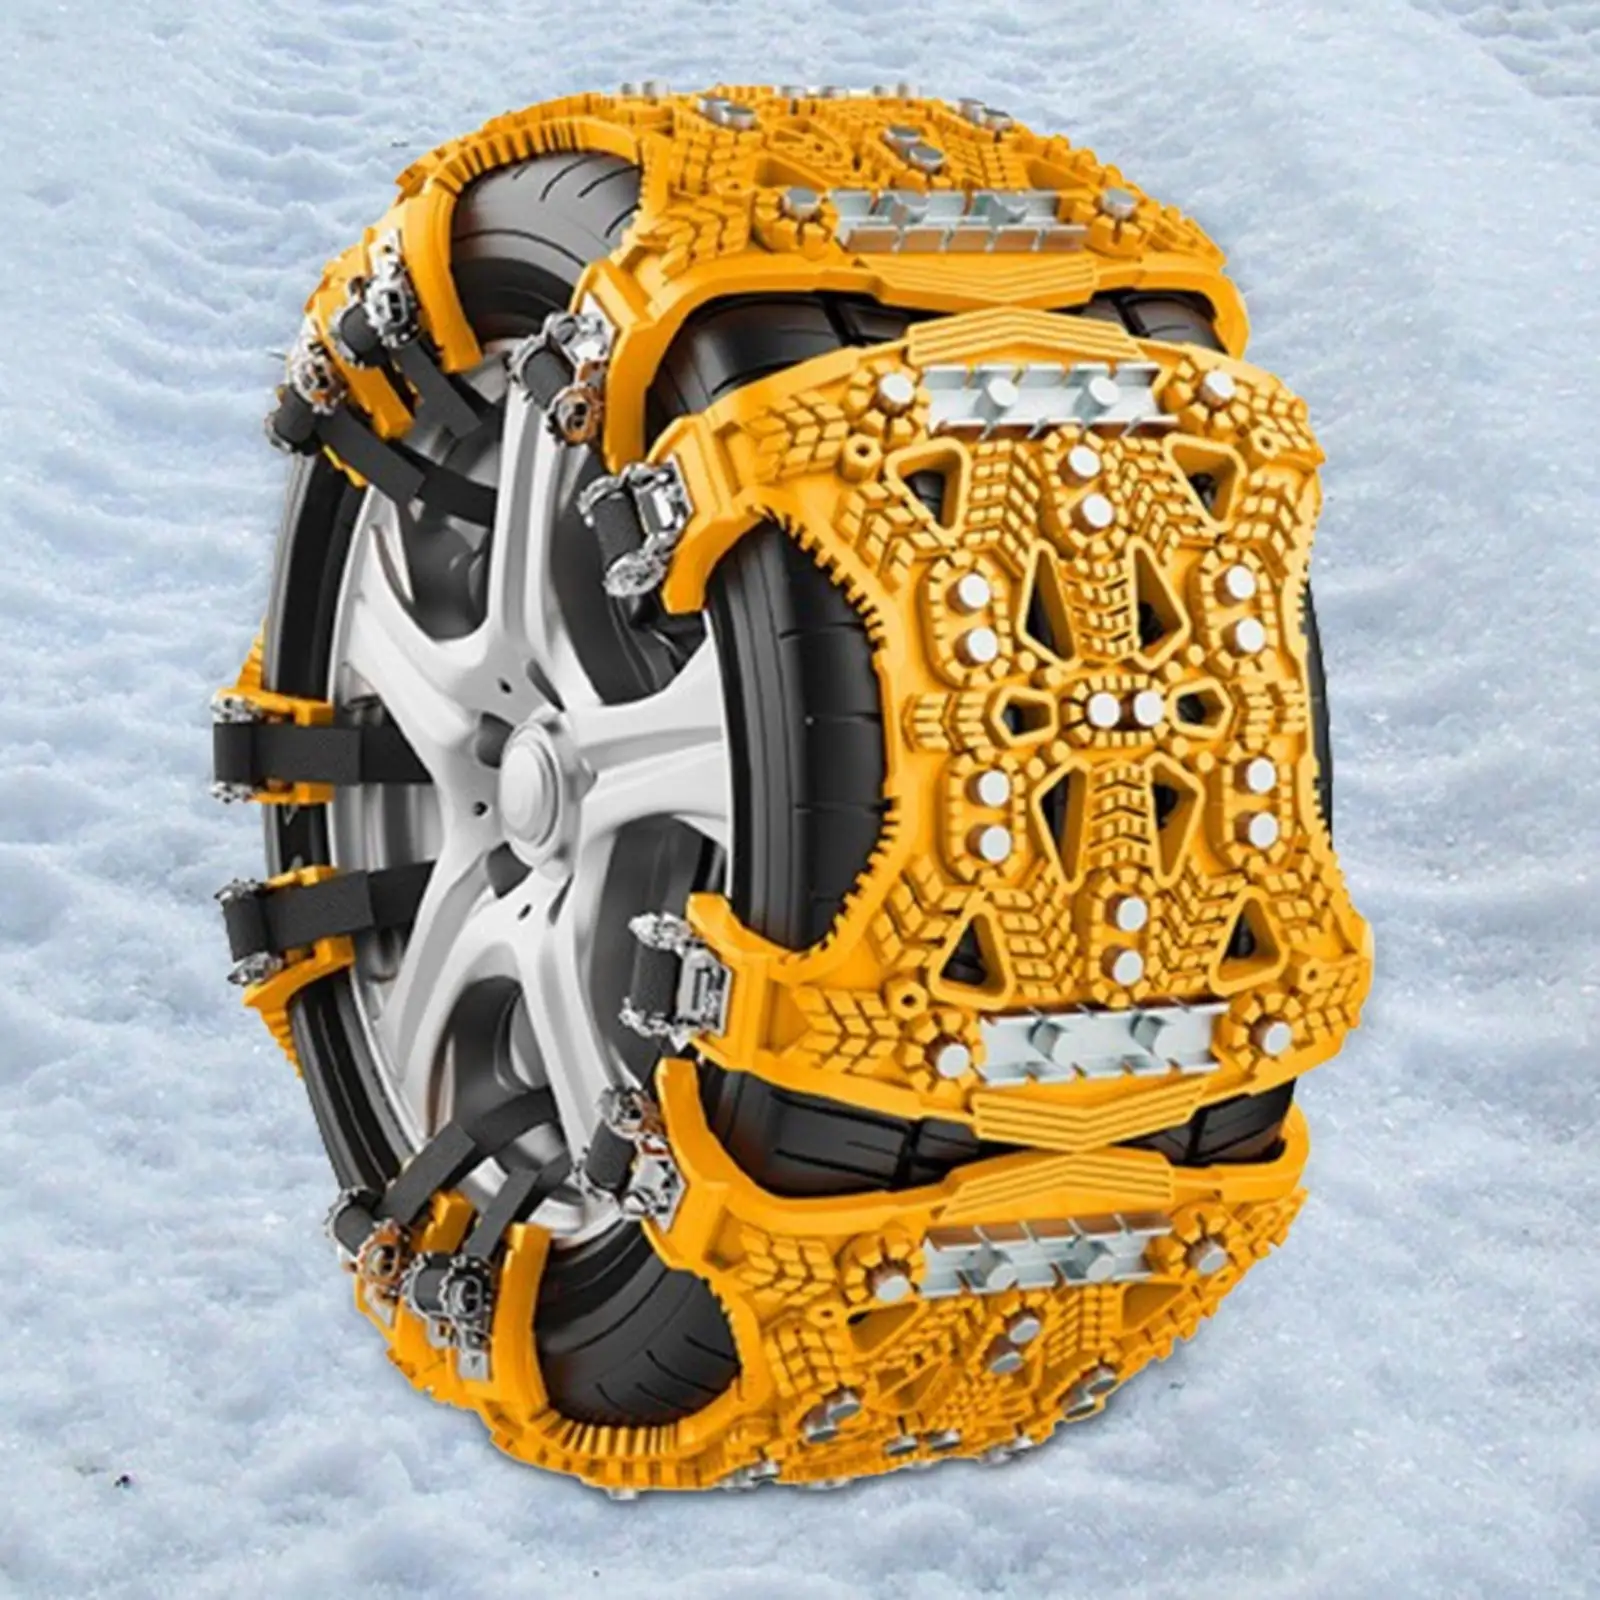 Car Wheel Tire Ice Snow Chain Portable for Emergency Traction Sturdy